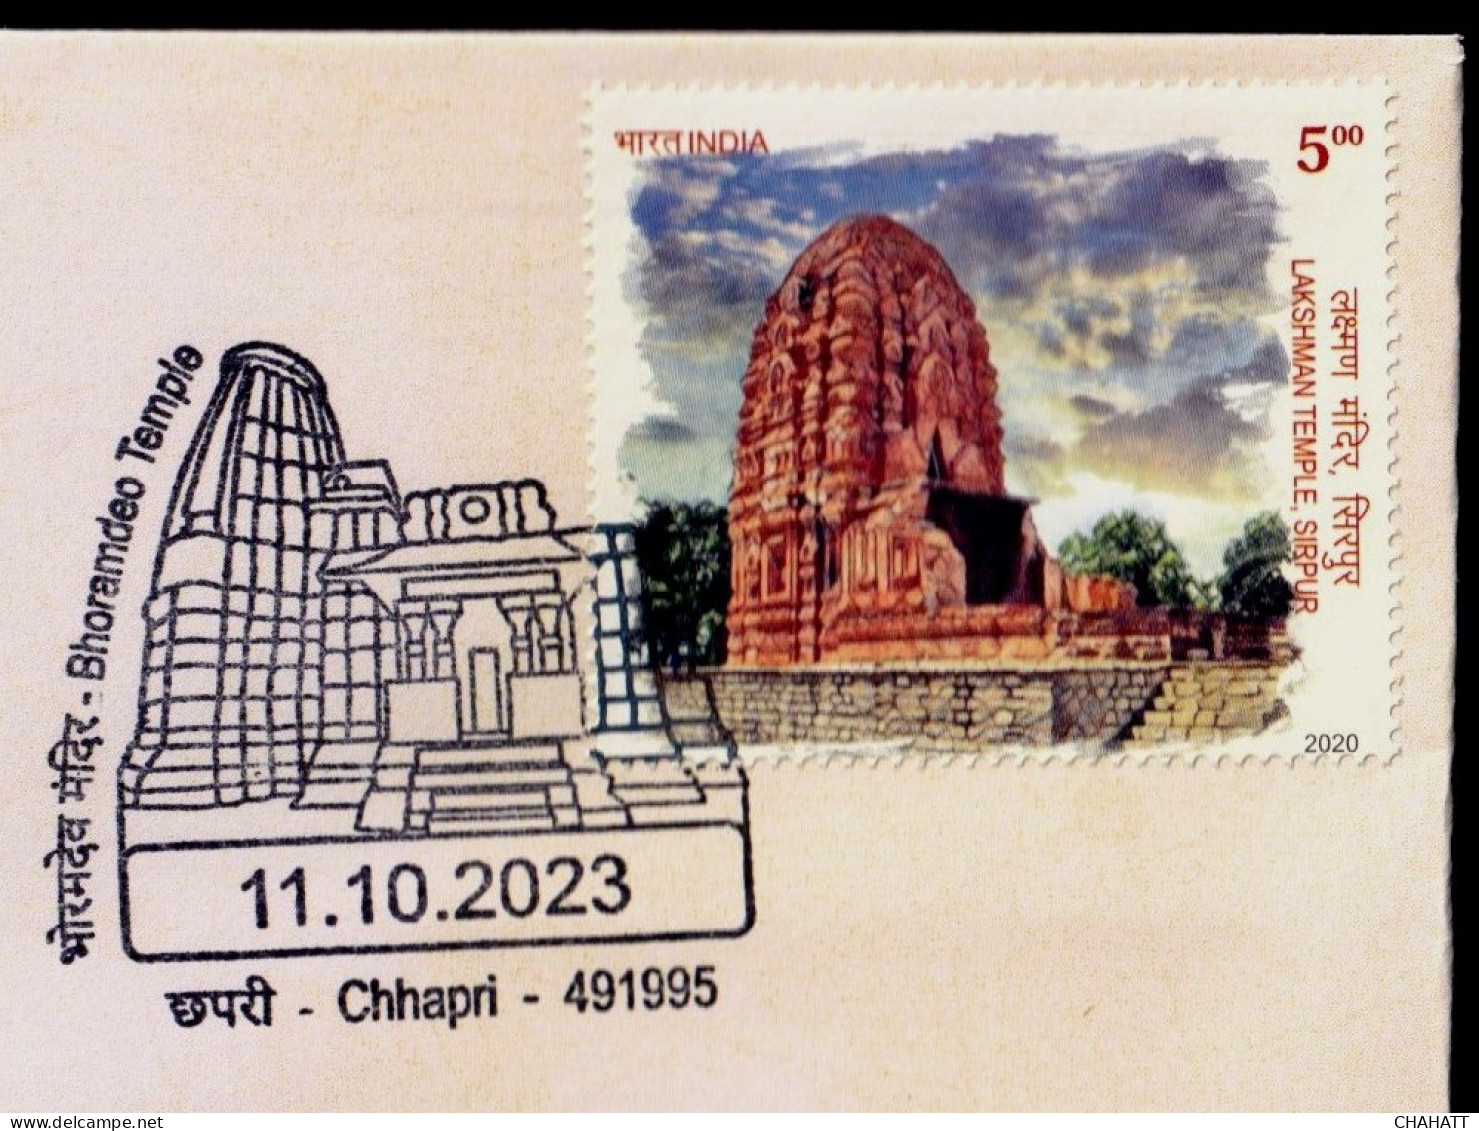 HINDUISM- BHORAMDEO TEMPLE- PERMANENT CACHET- INDIA POST, RAIPUR GPO-CG CIRCLE-LIMITED ISSUE-BX4-29 - Hinduismo